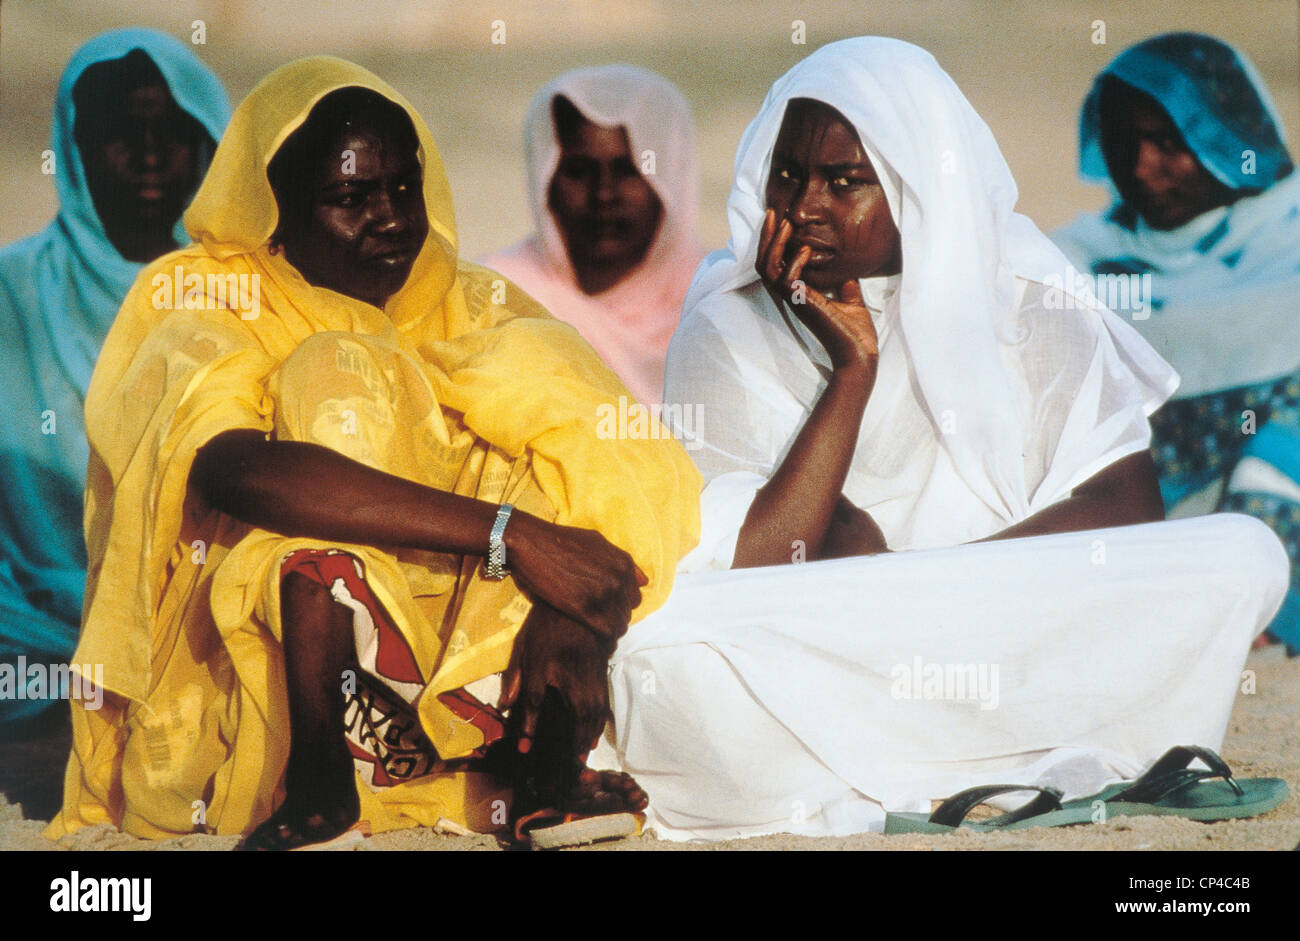 Chad - Lake Chad. Women in traditional clothing. Stock Photo